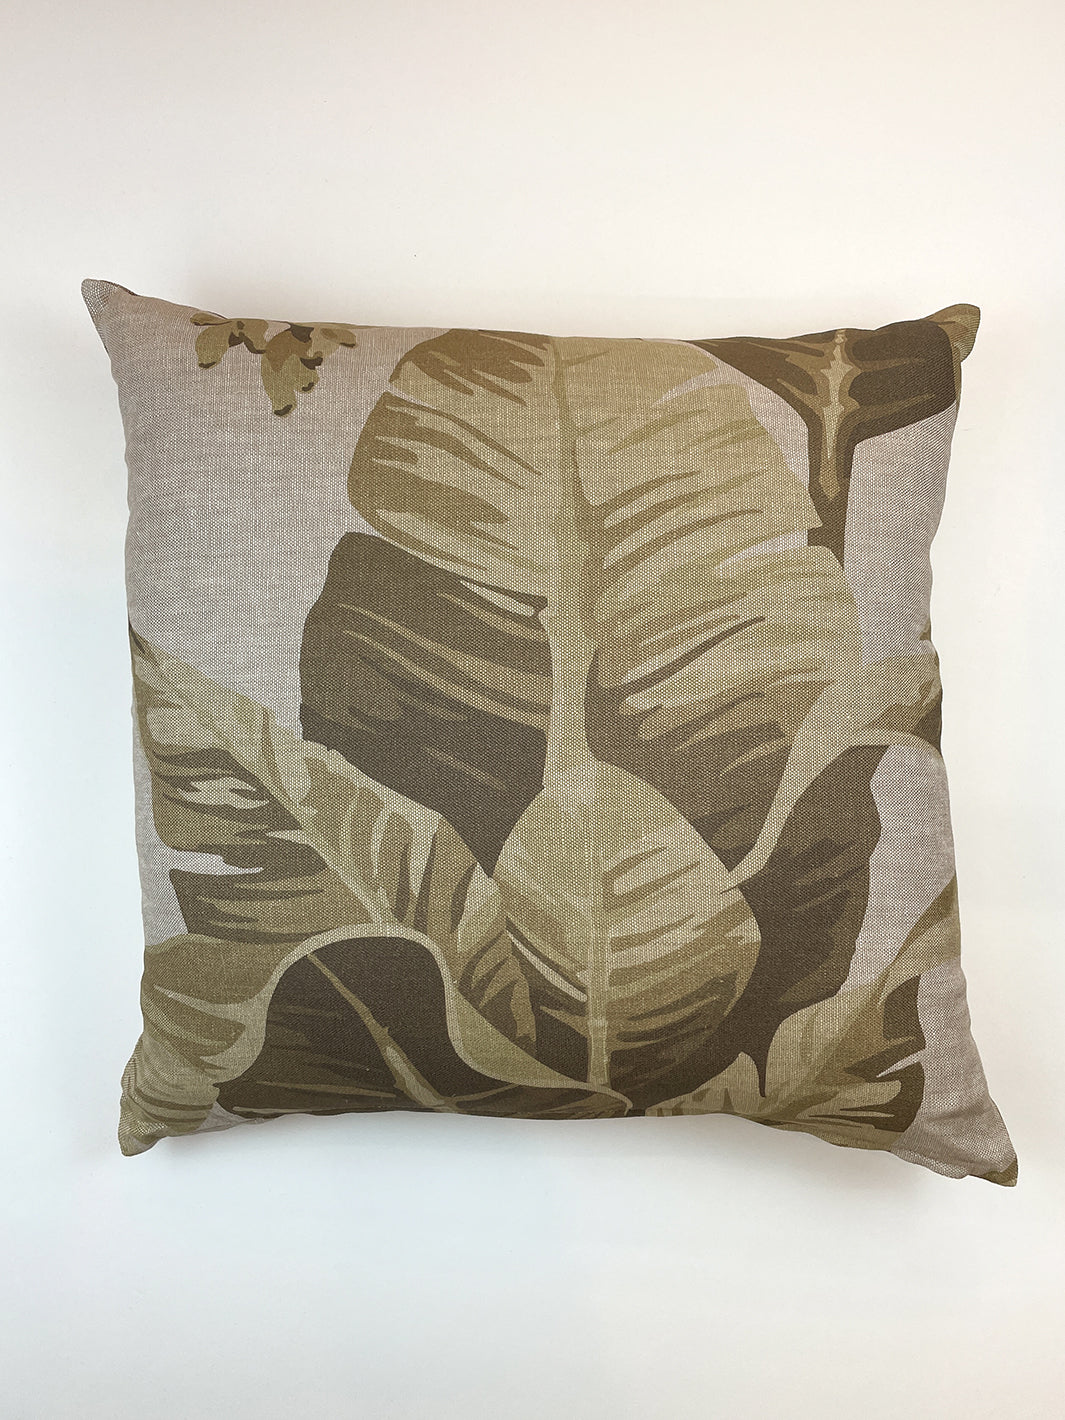 'Pacifico Palm' Throw Pillow by Nathan Turner - Cappuccino on Flax Linen